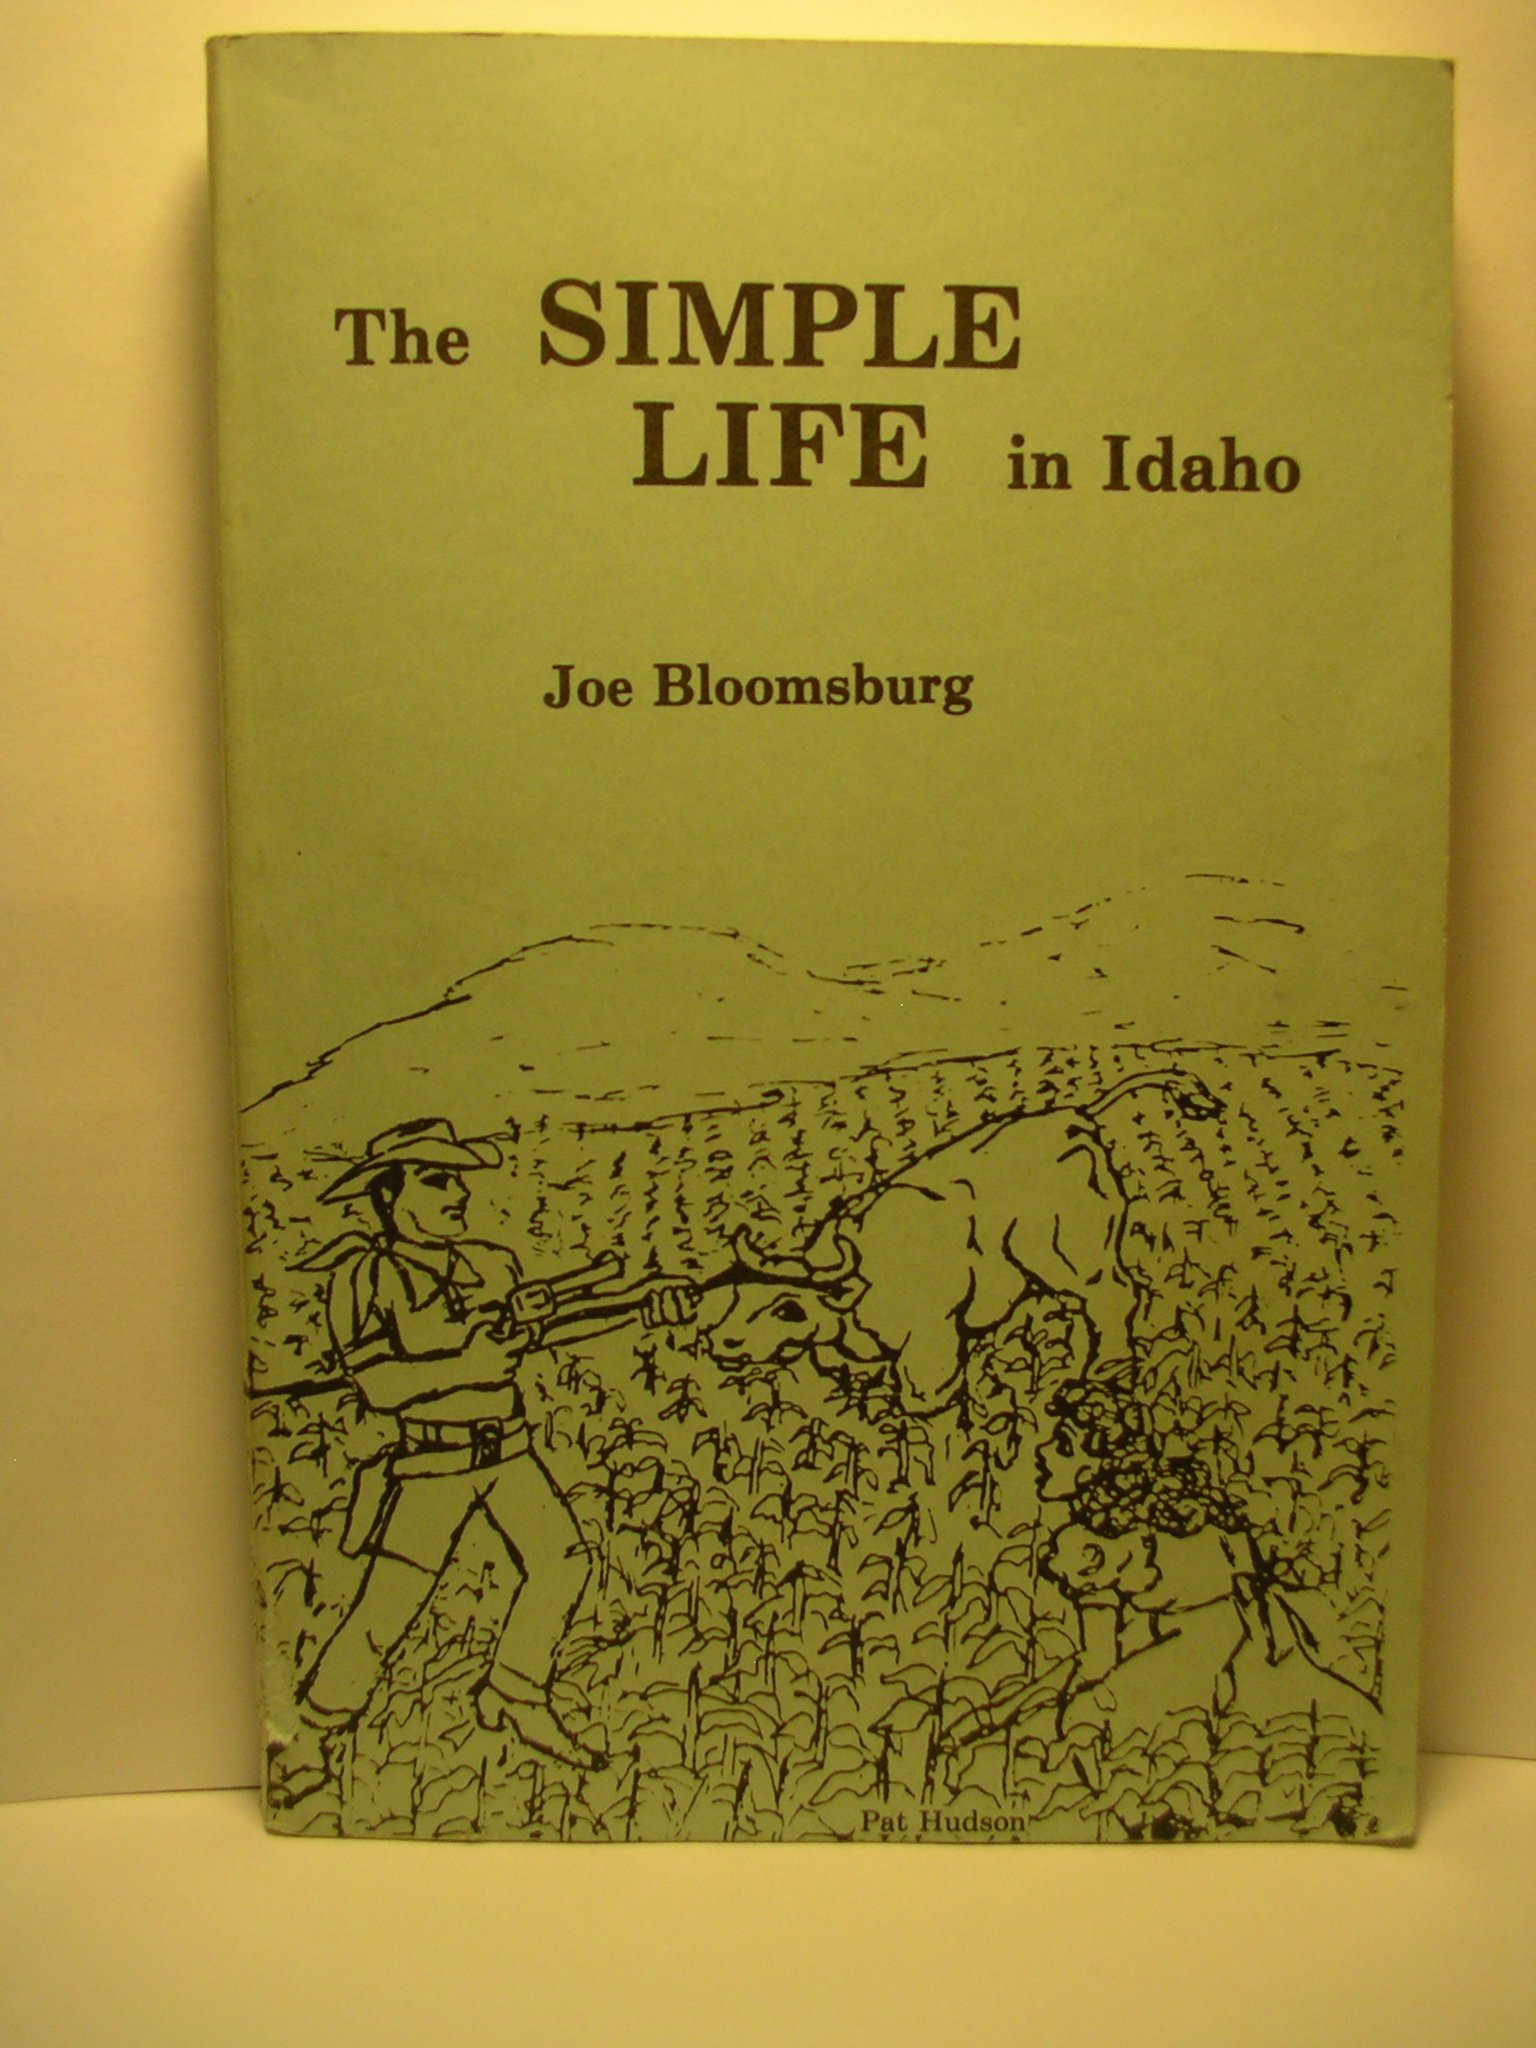 The simple life in Idaho (book cover)